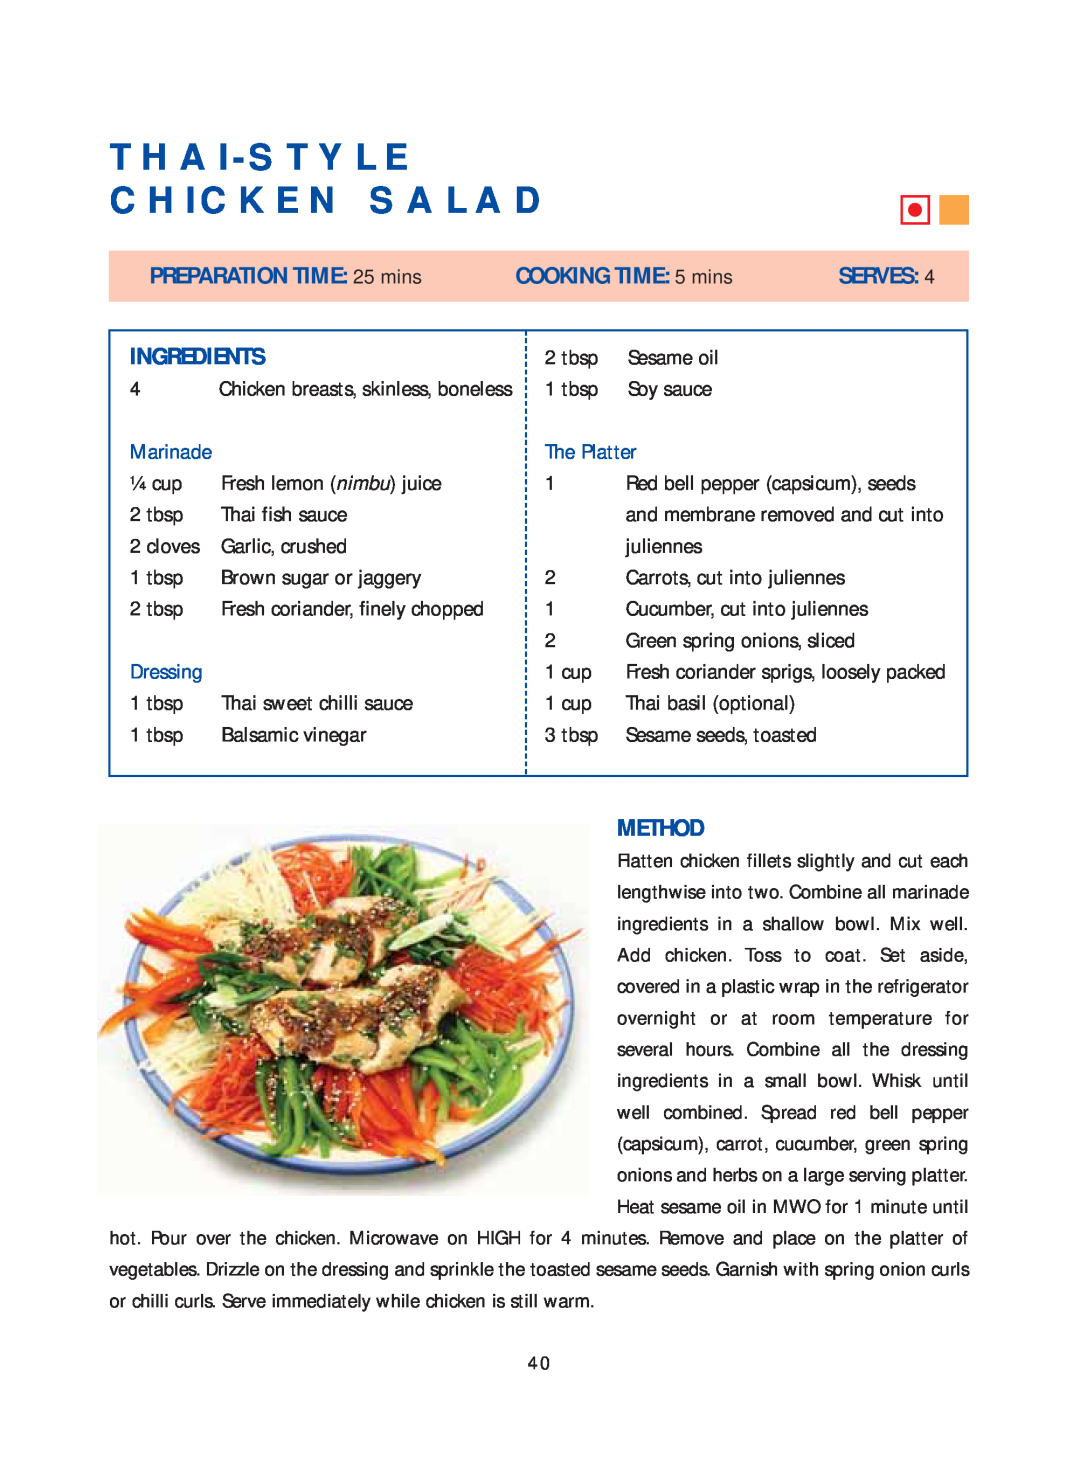 Samsung Microwave Oven Thai-Style Chicken Salad, PREPARATION TIME: 25 mins, COOKING TIME 5 mins, Serves, Ingredients 